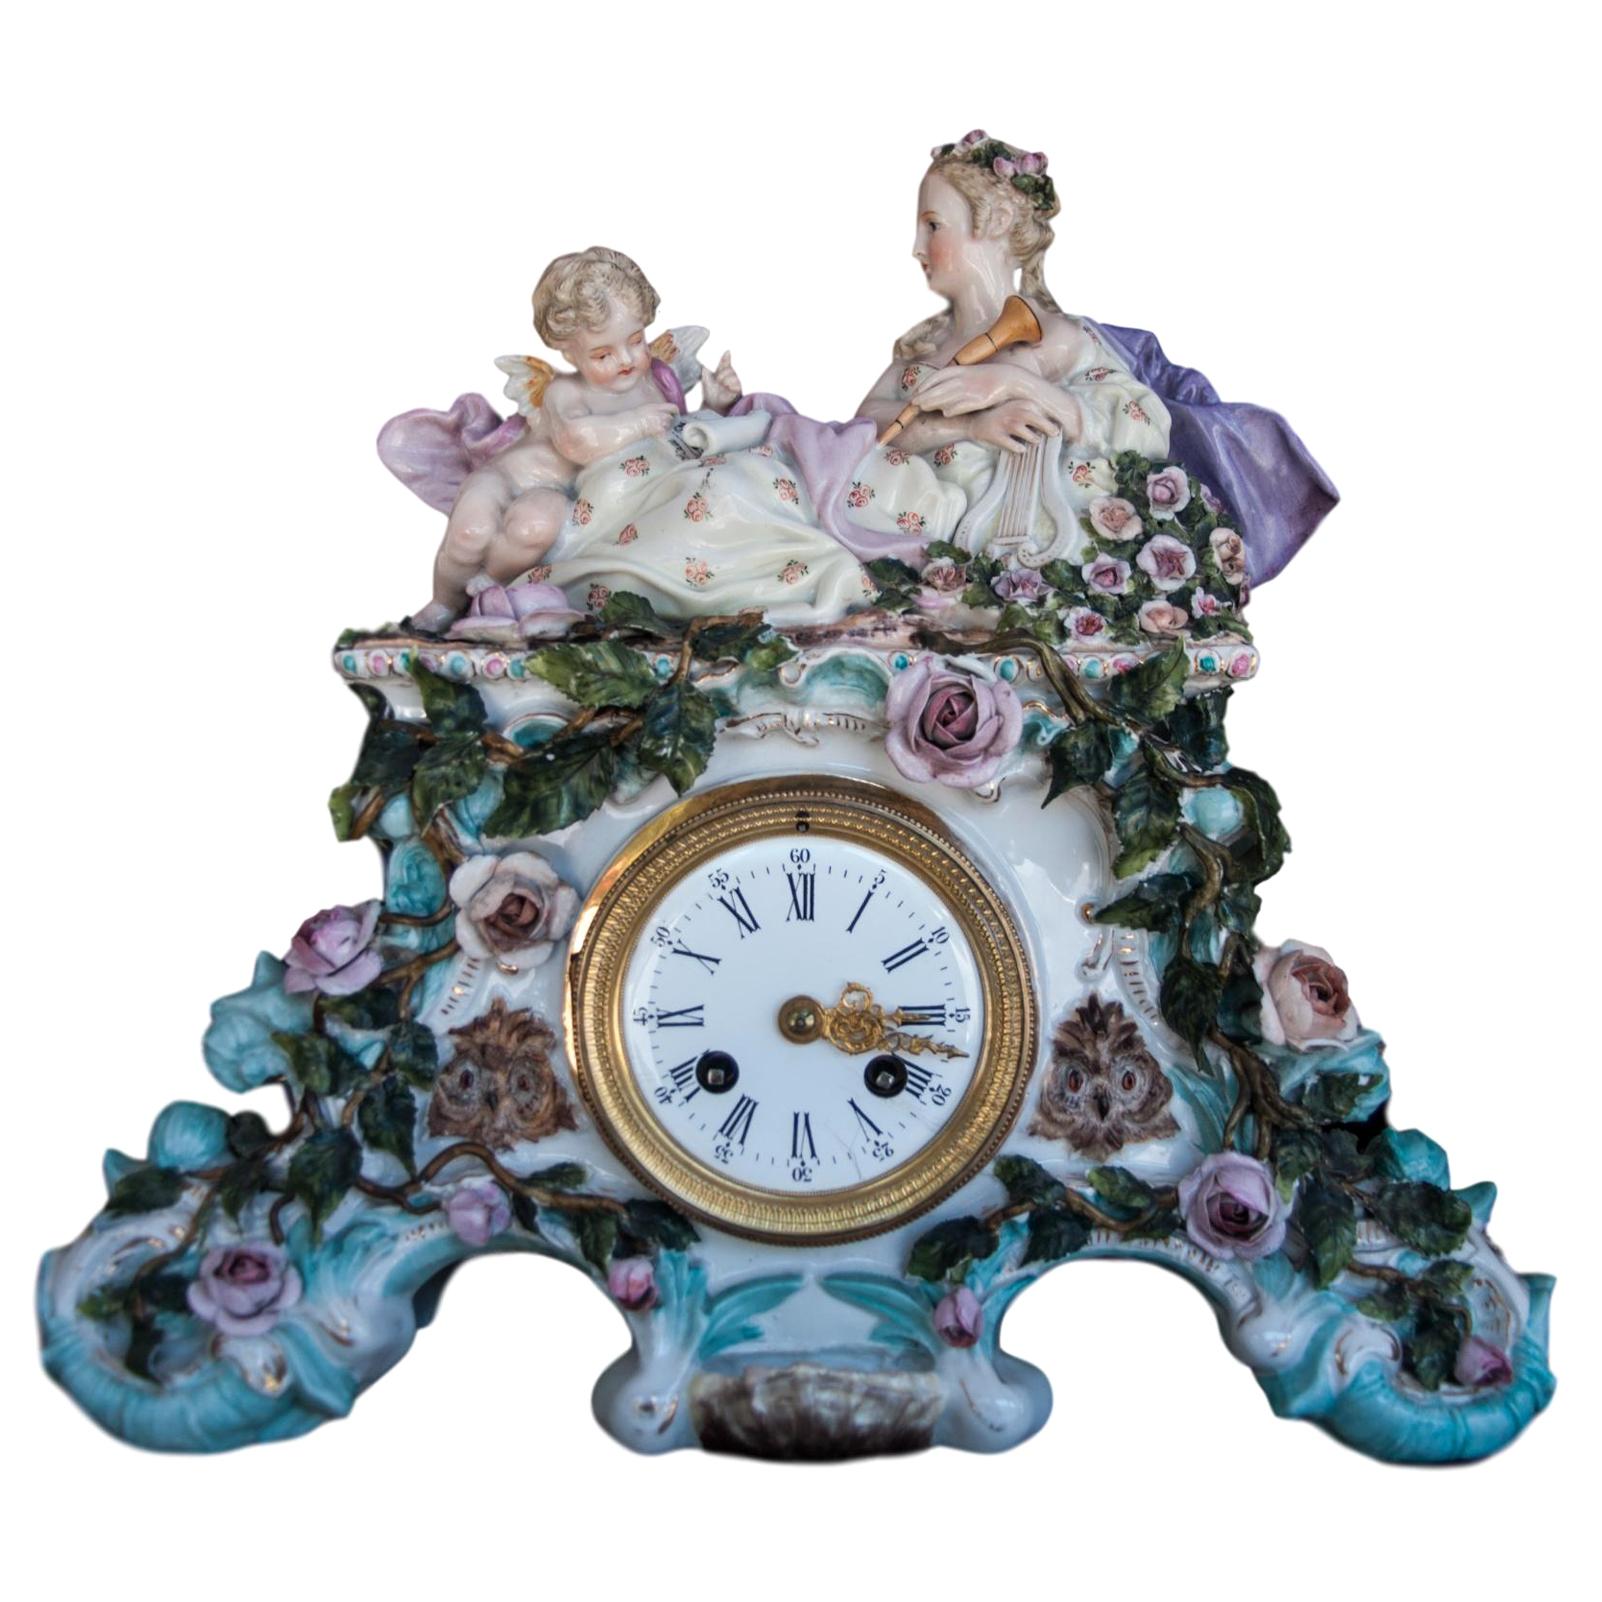 Early 20th Century Dresden Porcelain Clock